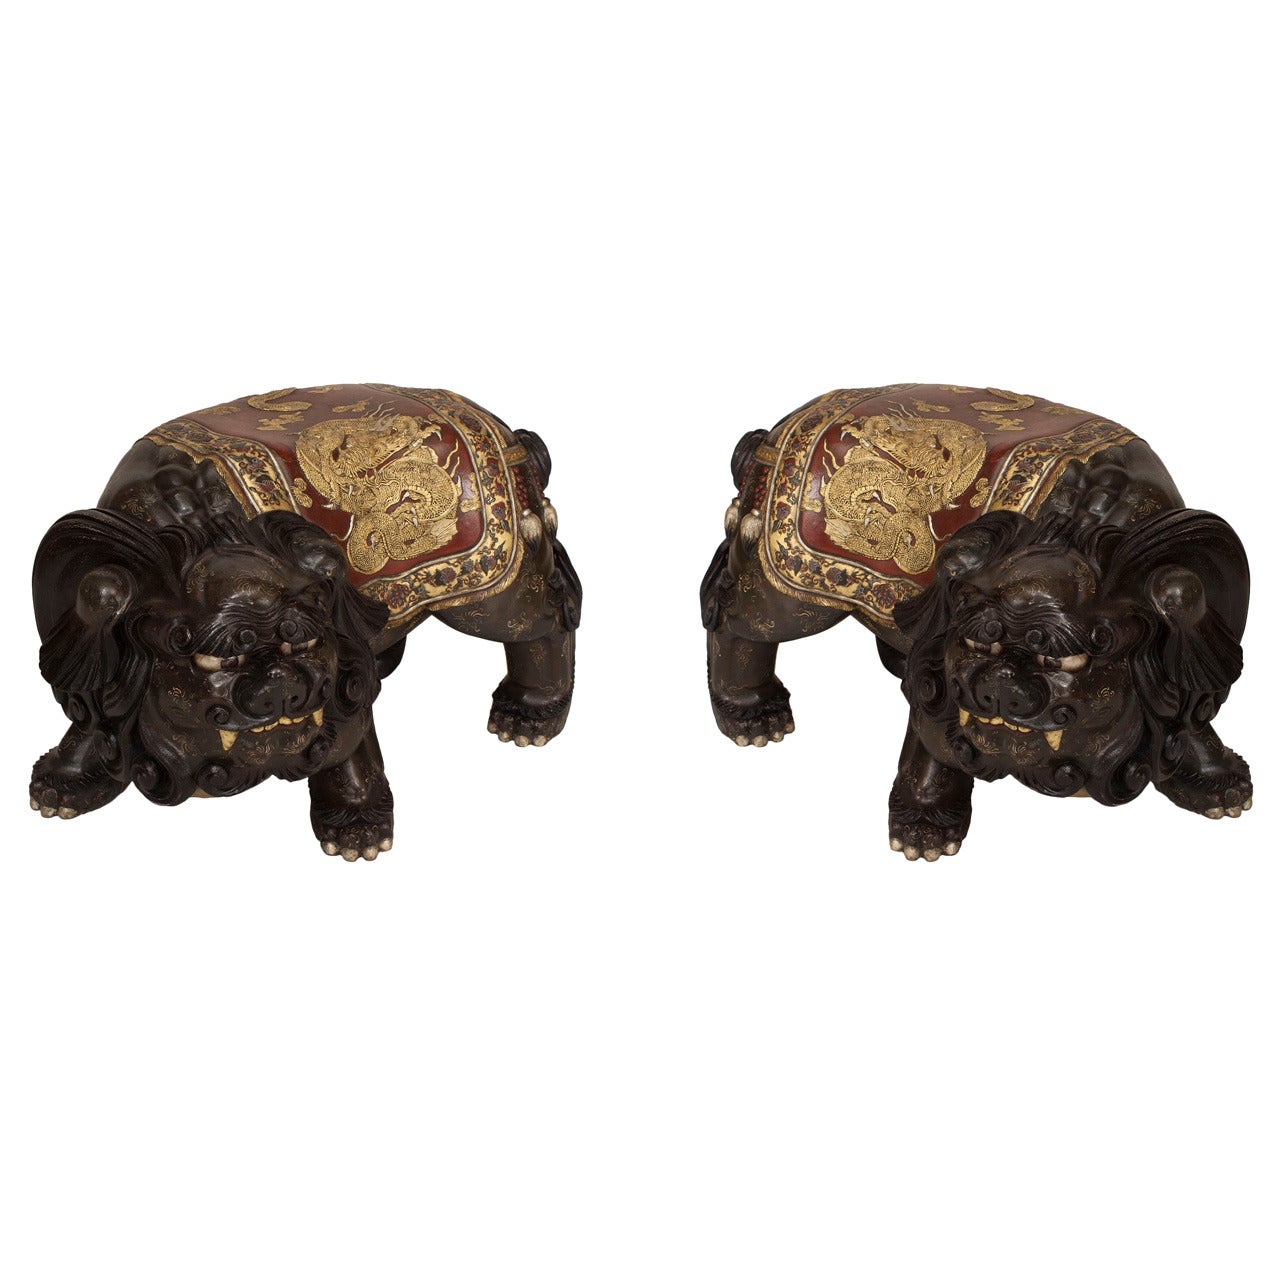 Large Pair of Japanese Gilt-Carved Foo Dog Benches